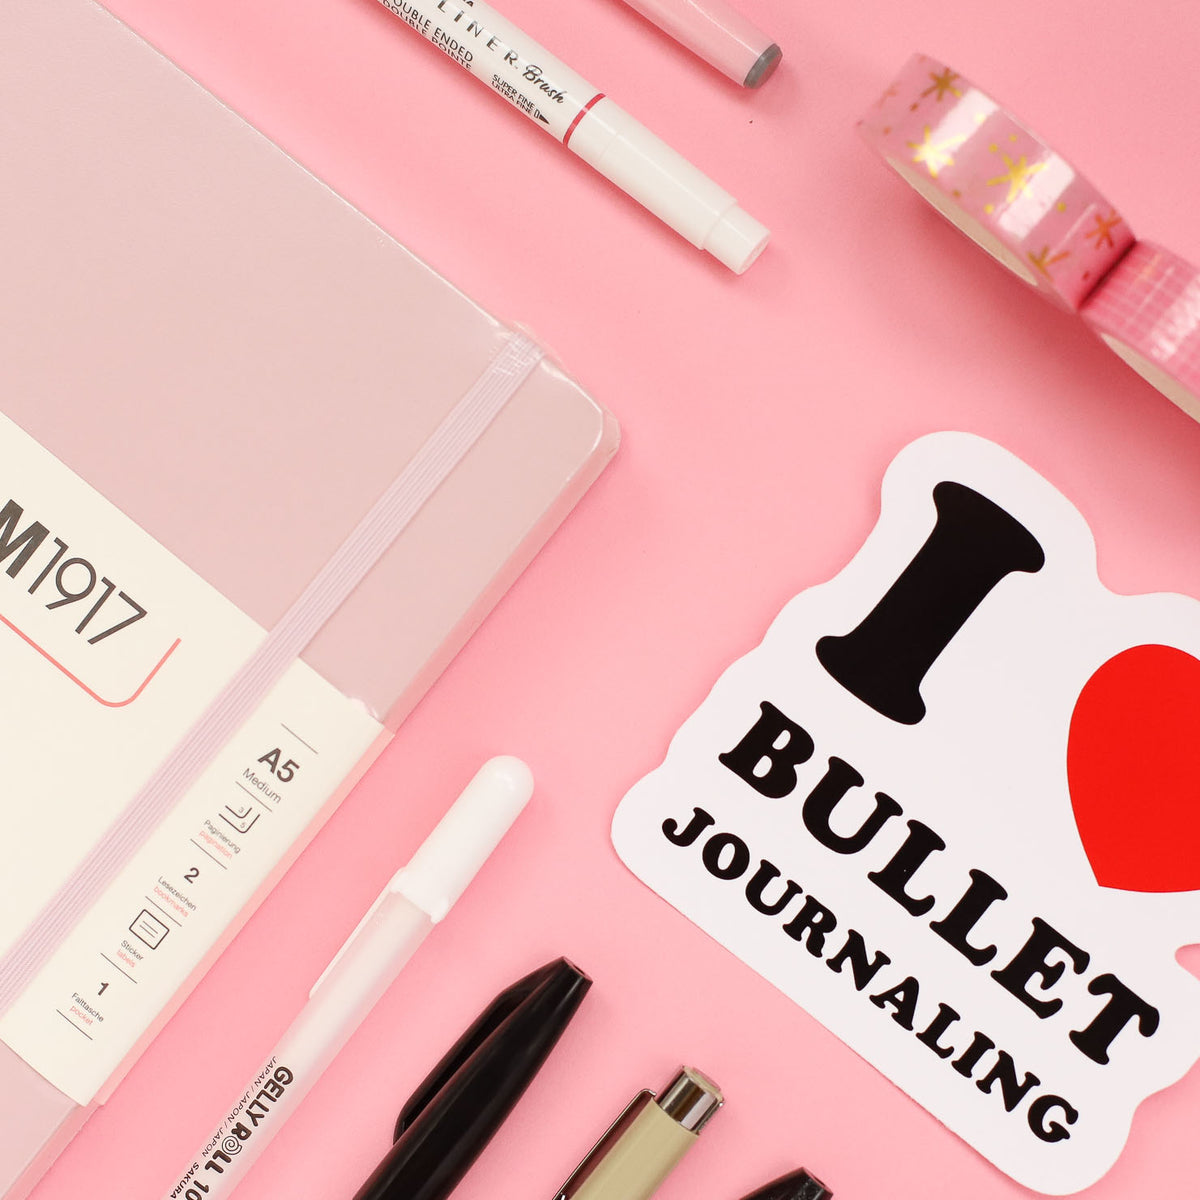 The Most Essential Bullet Journal Supplies for Starters